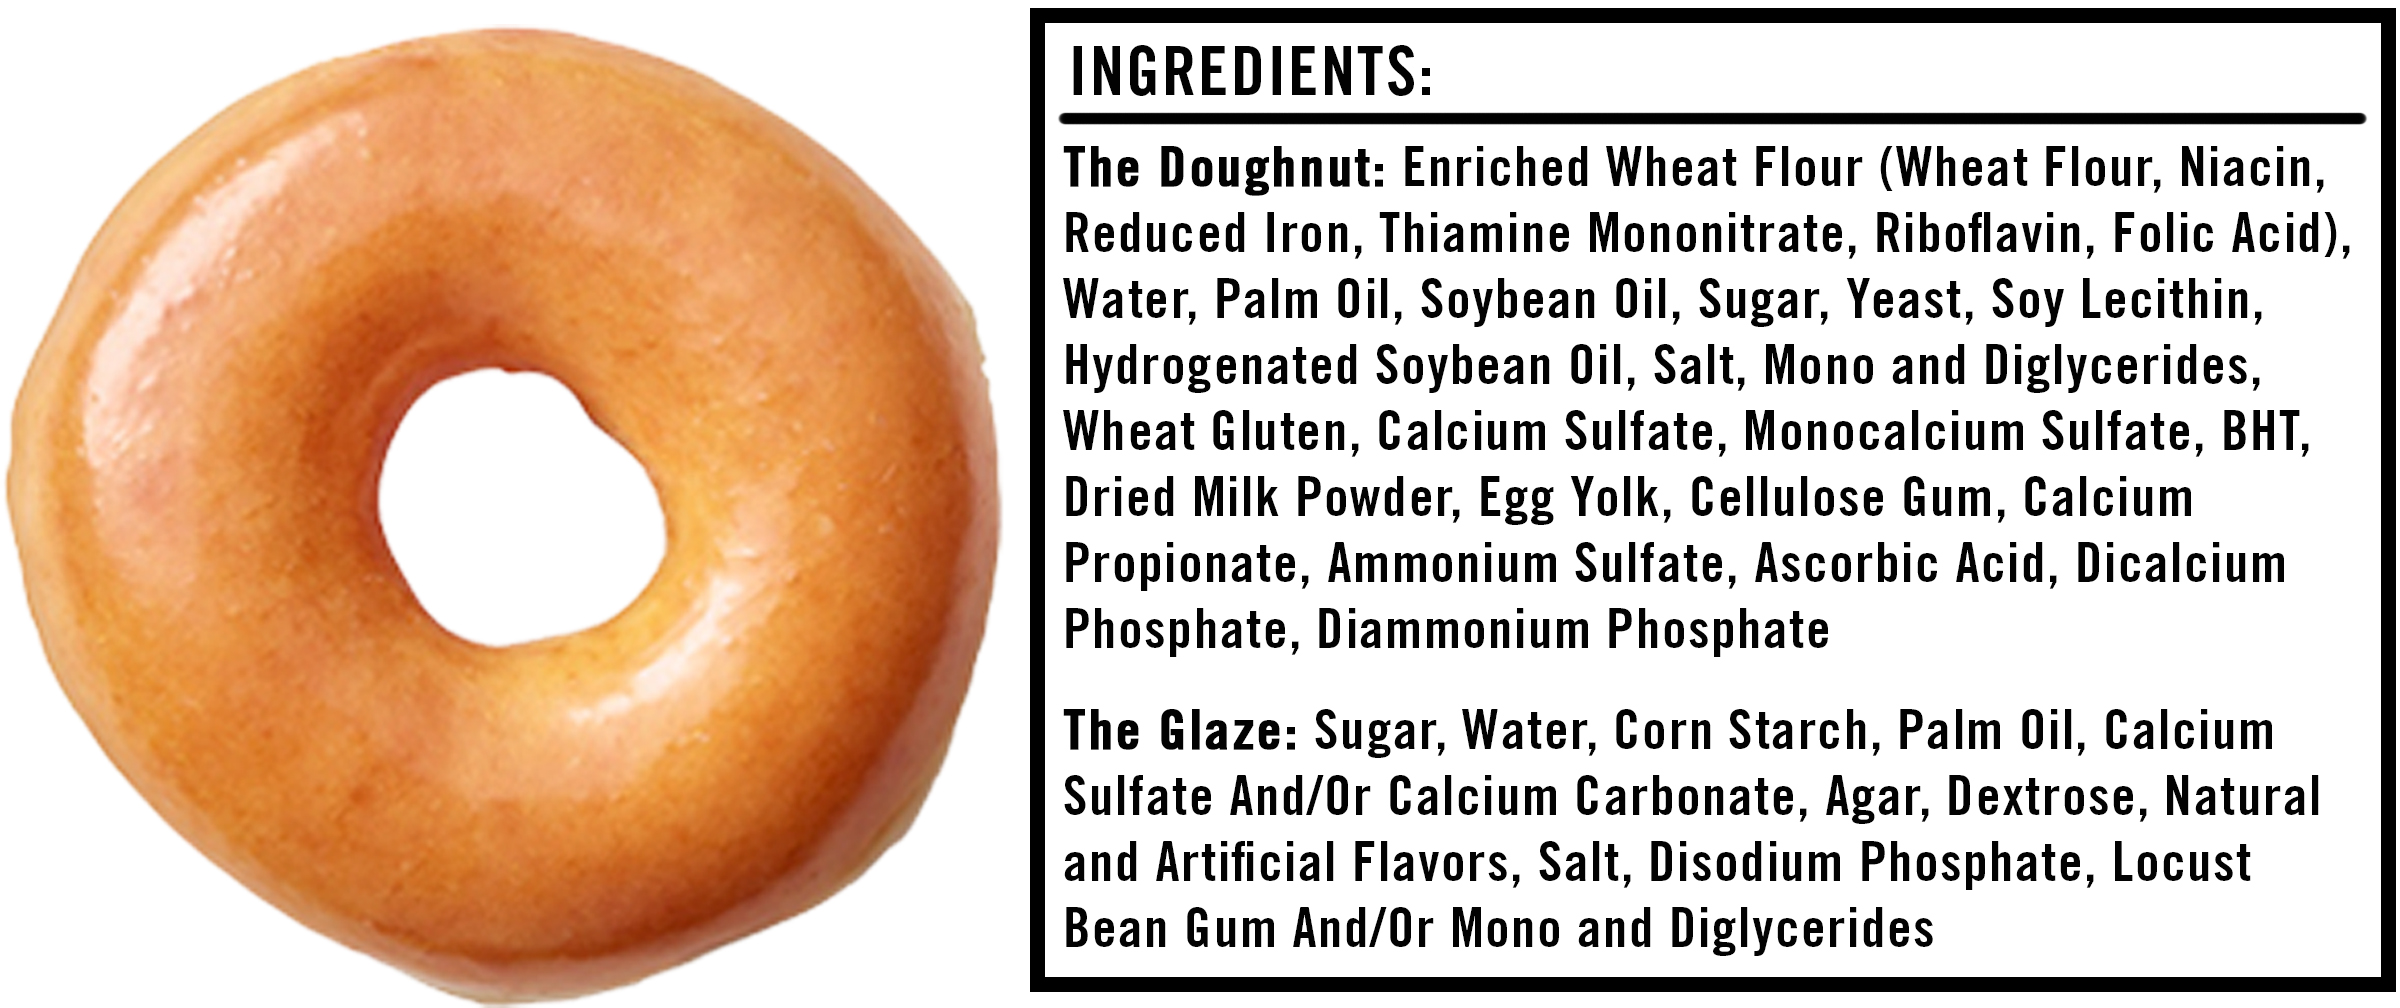 what-are-the-krispy-kreme-donut-ingredients-an-investigation